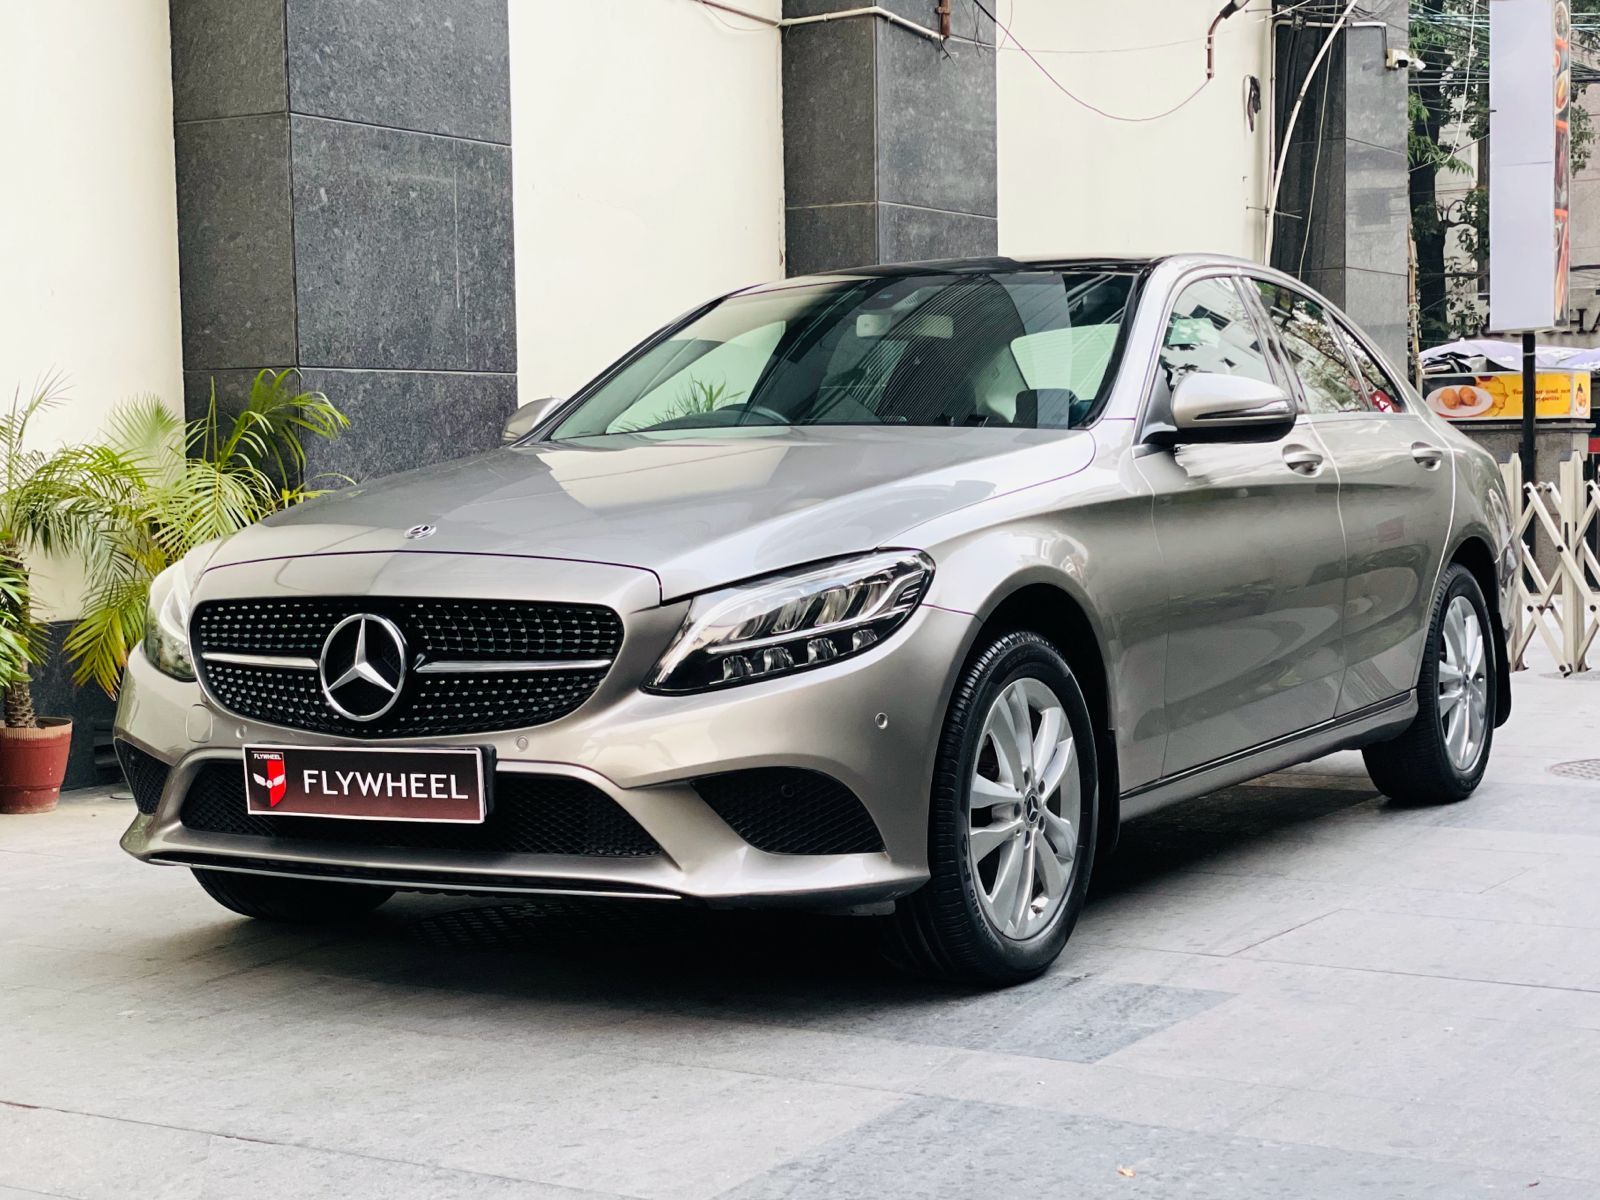 Mercedes Benz C220D 2018: A Blend of Luxury and Performance